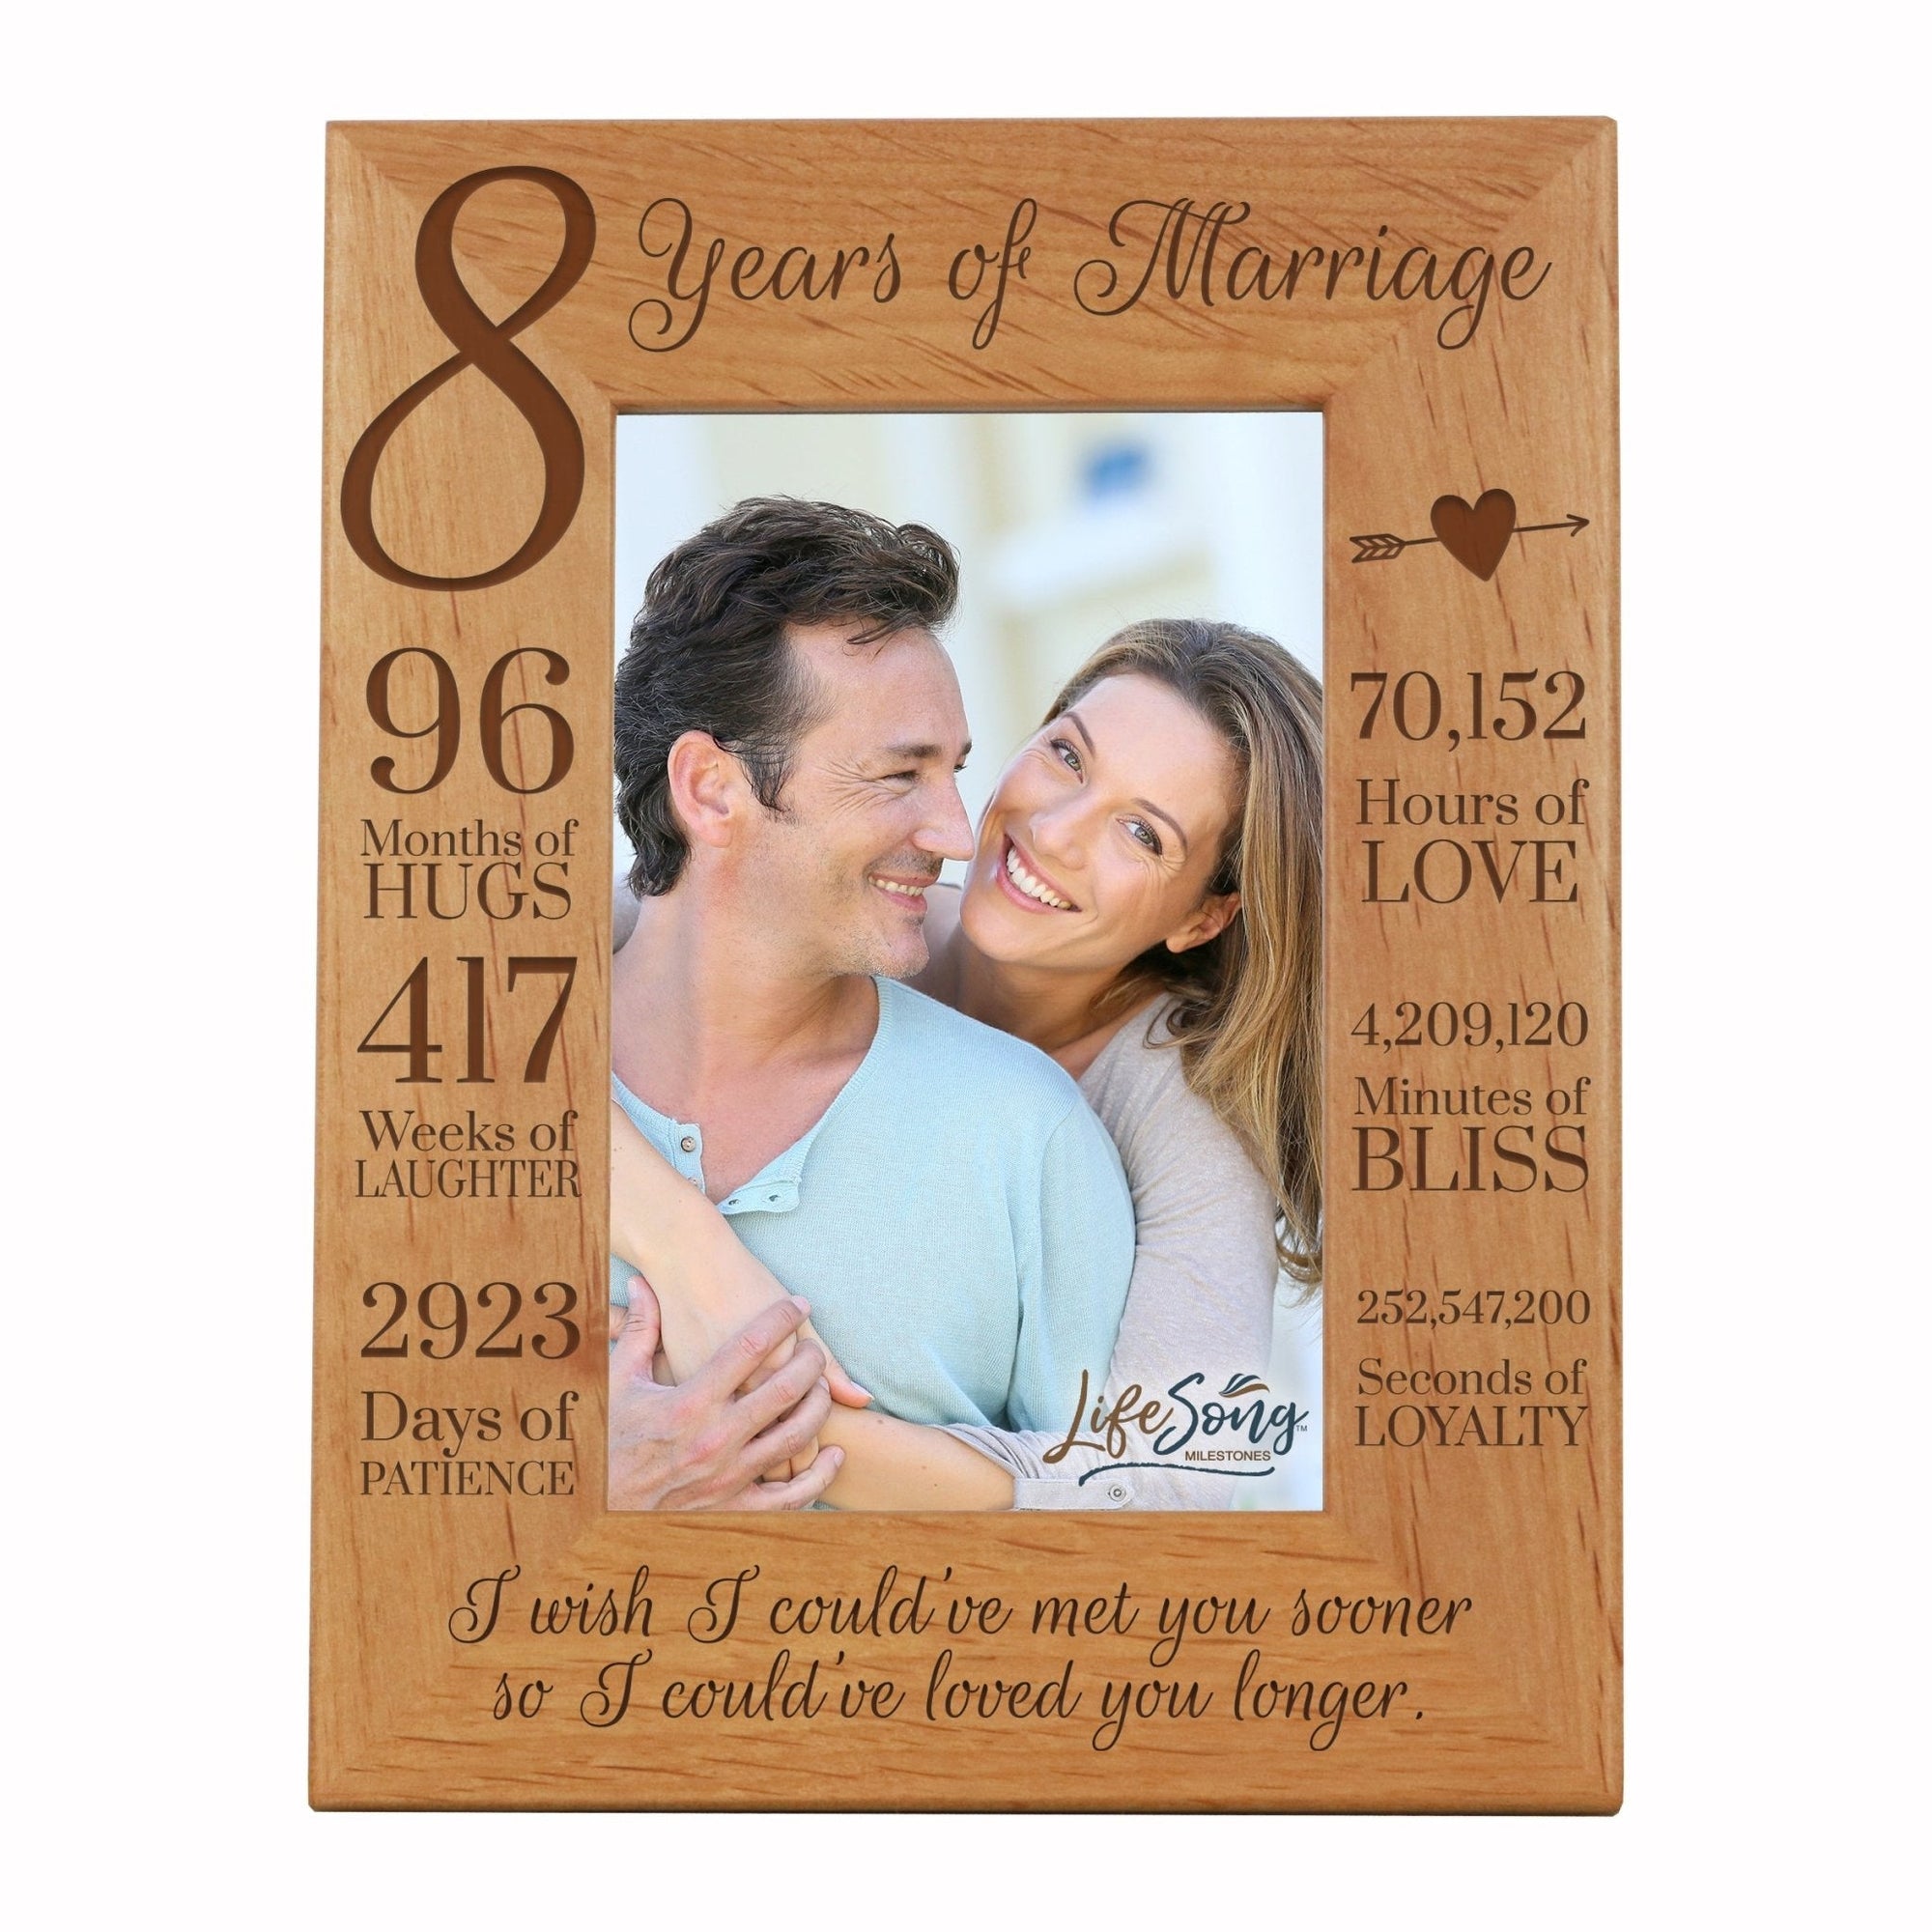 Engraved 8th Wedding Anniversary Photo Frame Wall Decor Gift for Couples - Loved You Longer - LifeSong Milestones